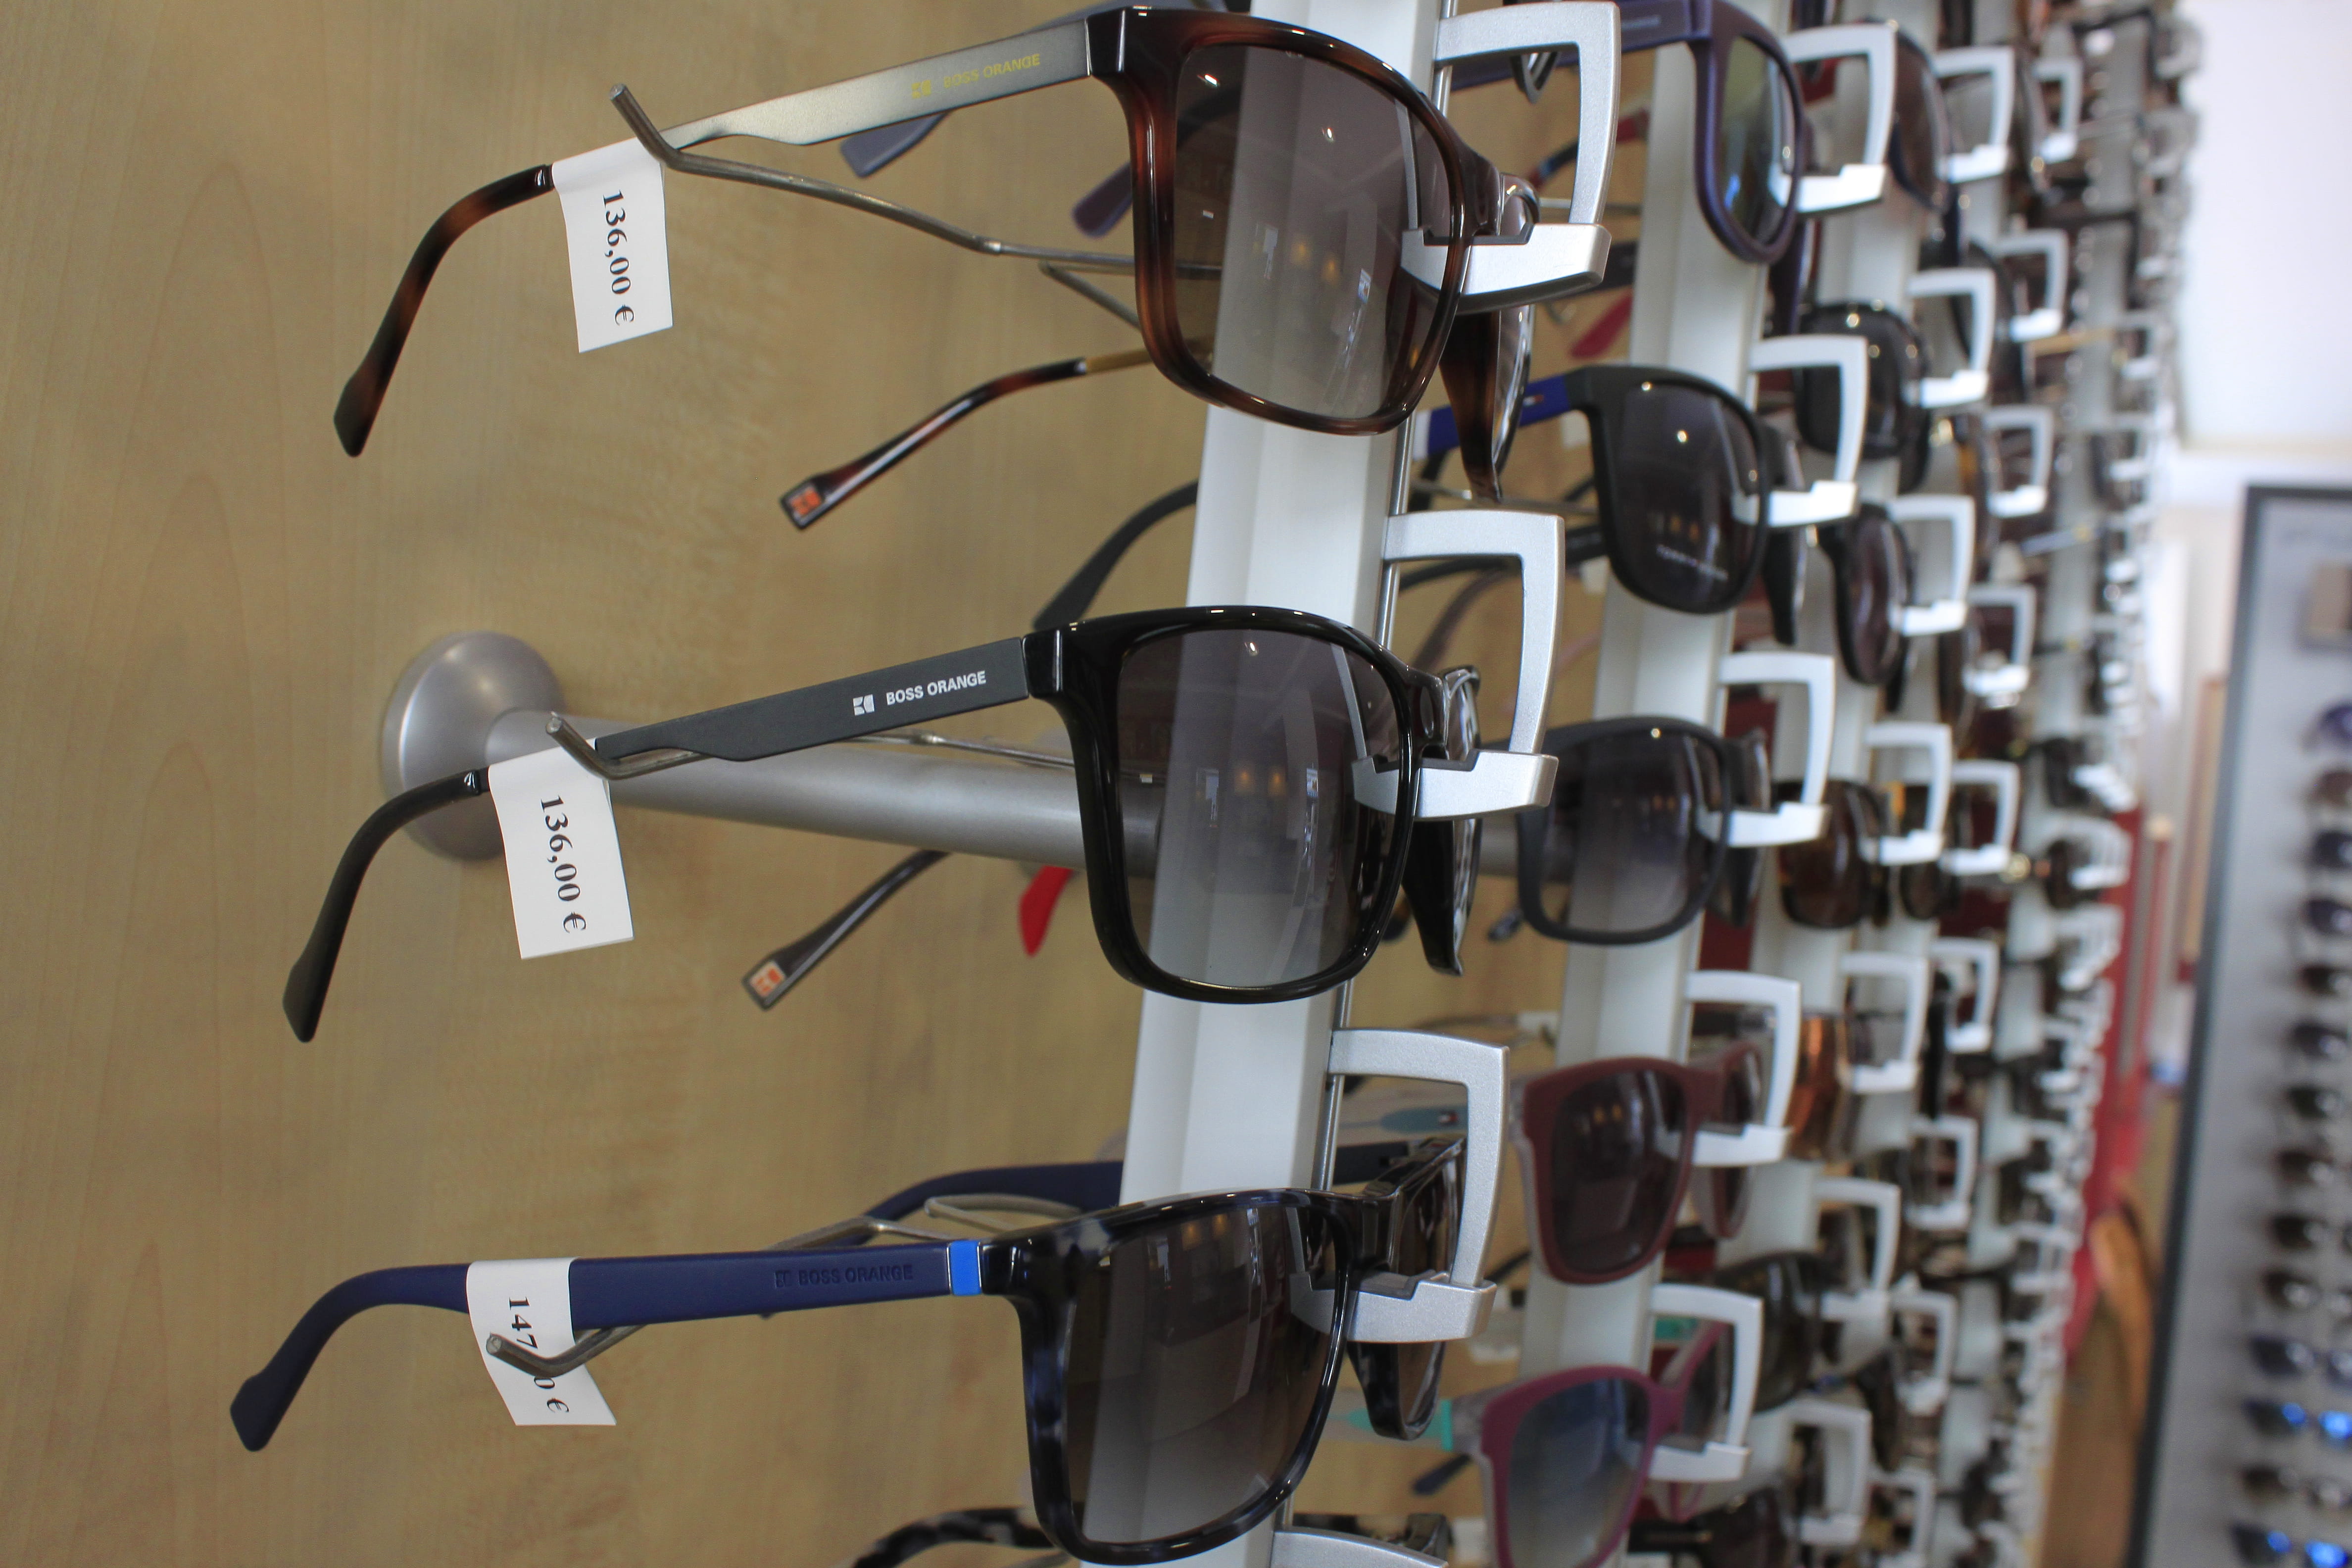 Case study - Opticians labelling